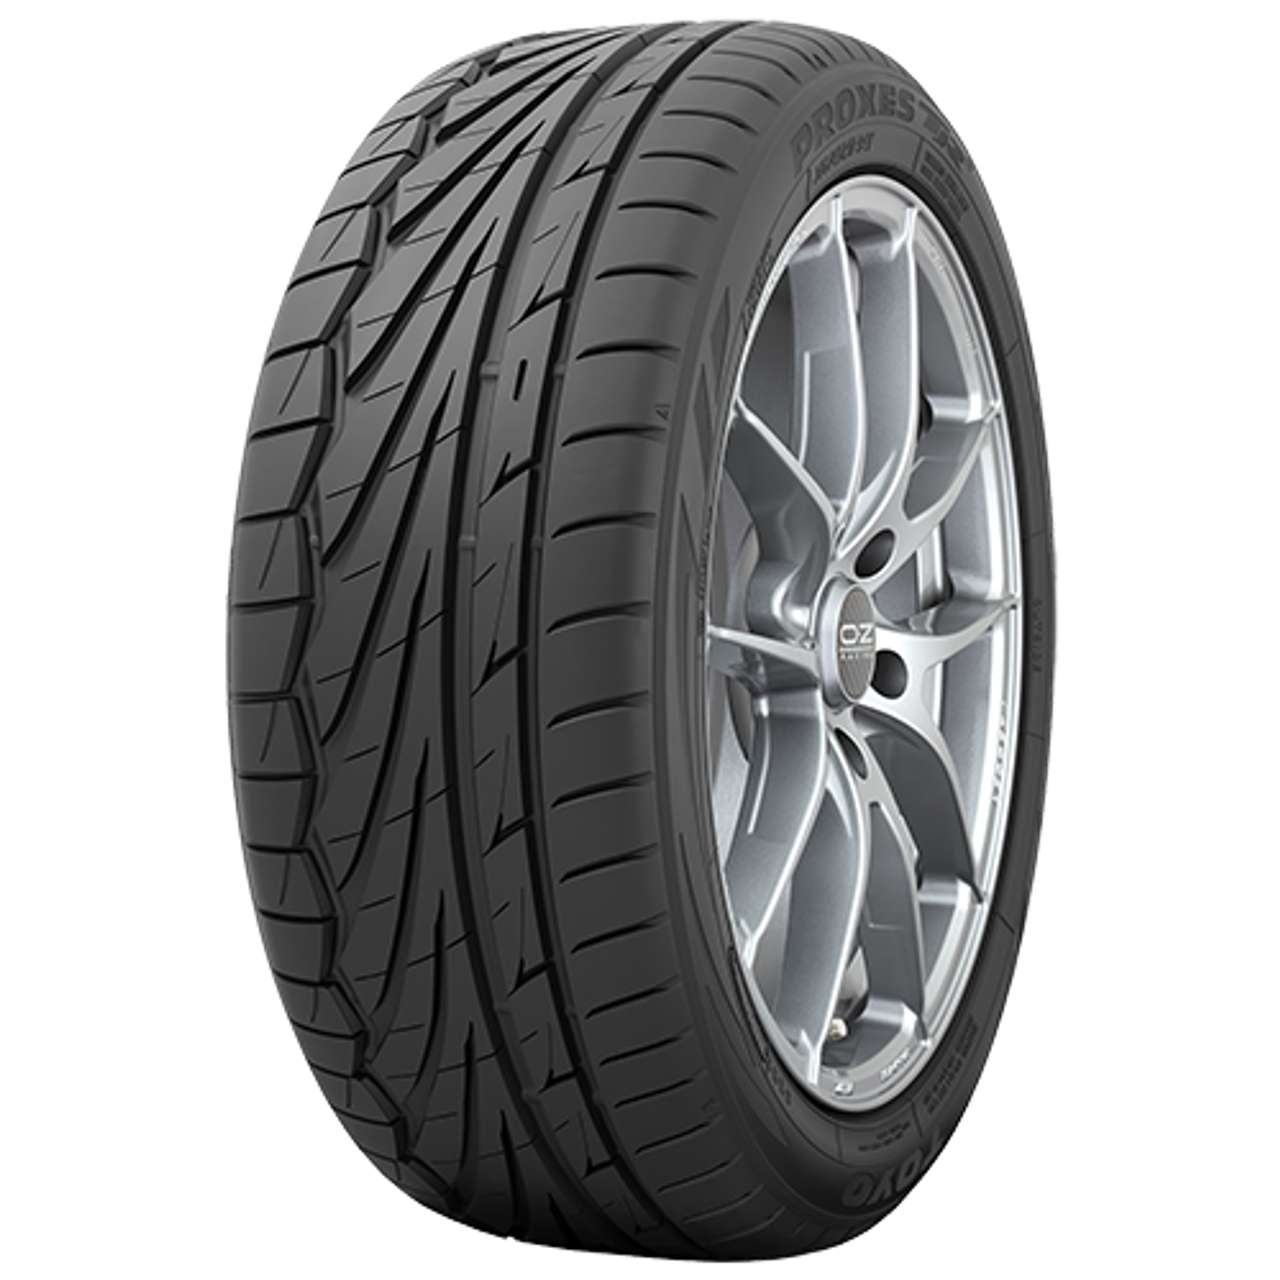 TOYO PROXES TR1 195/50R15 82V BSW